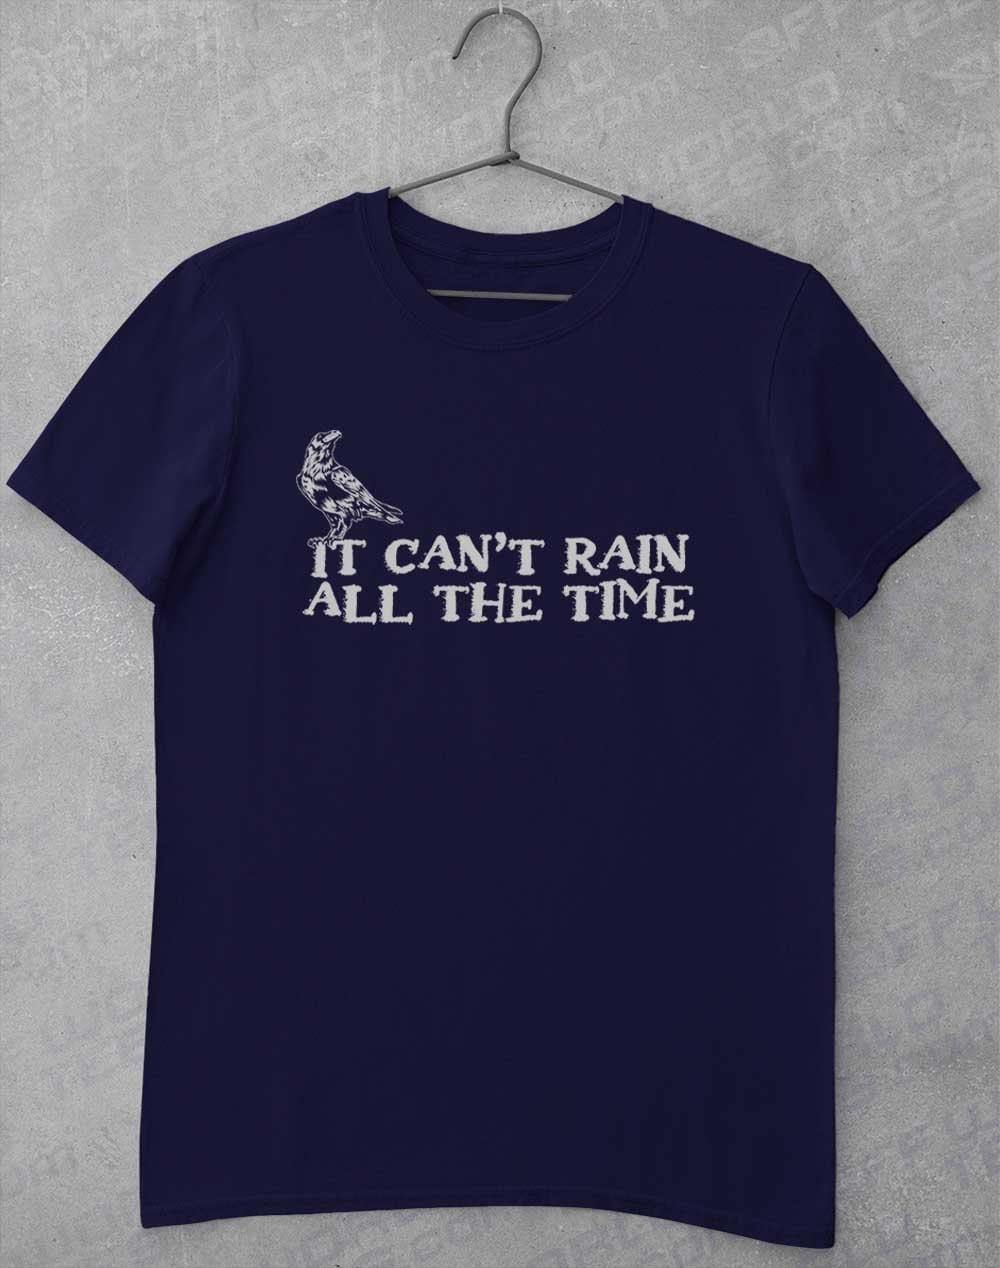 It Can't Rain All the Time T-Shirt S / Navy  - Off World Tees